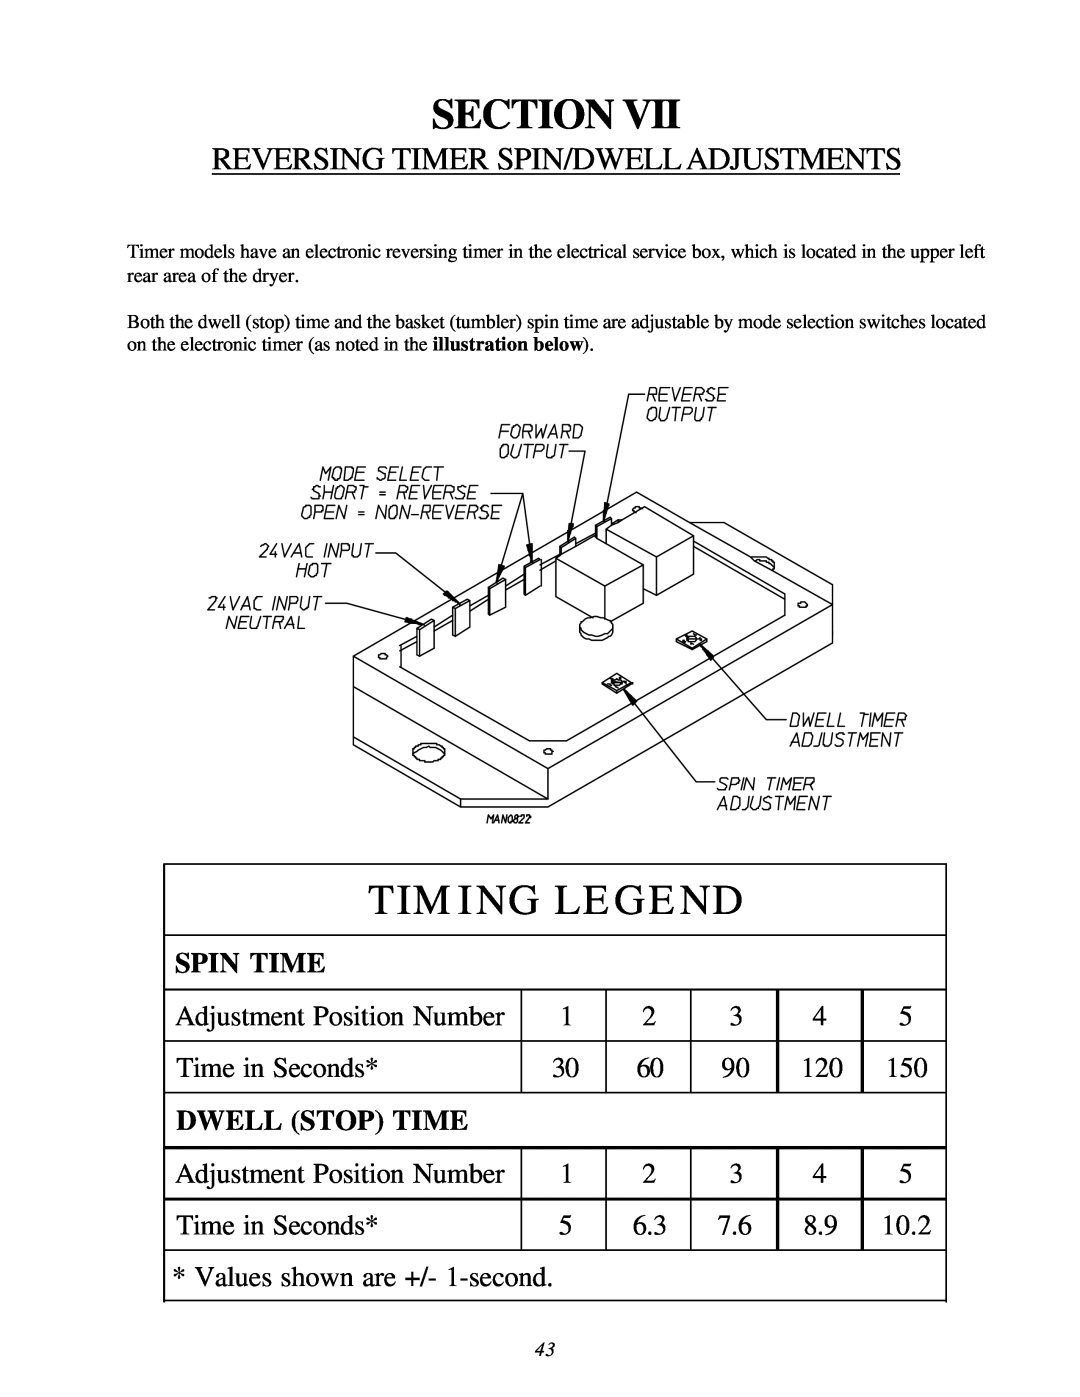 American Dryer Corp ML-122D Reversing Timer Spin/Dwell Adjustments, Adjustment Position Number, Time in Seconds, 10.2 